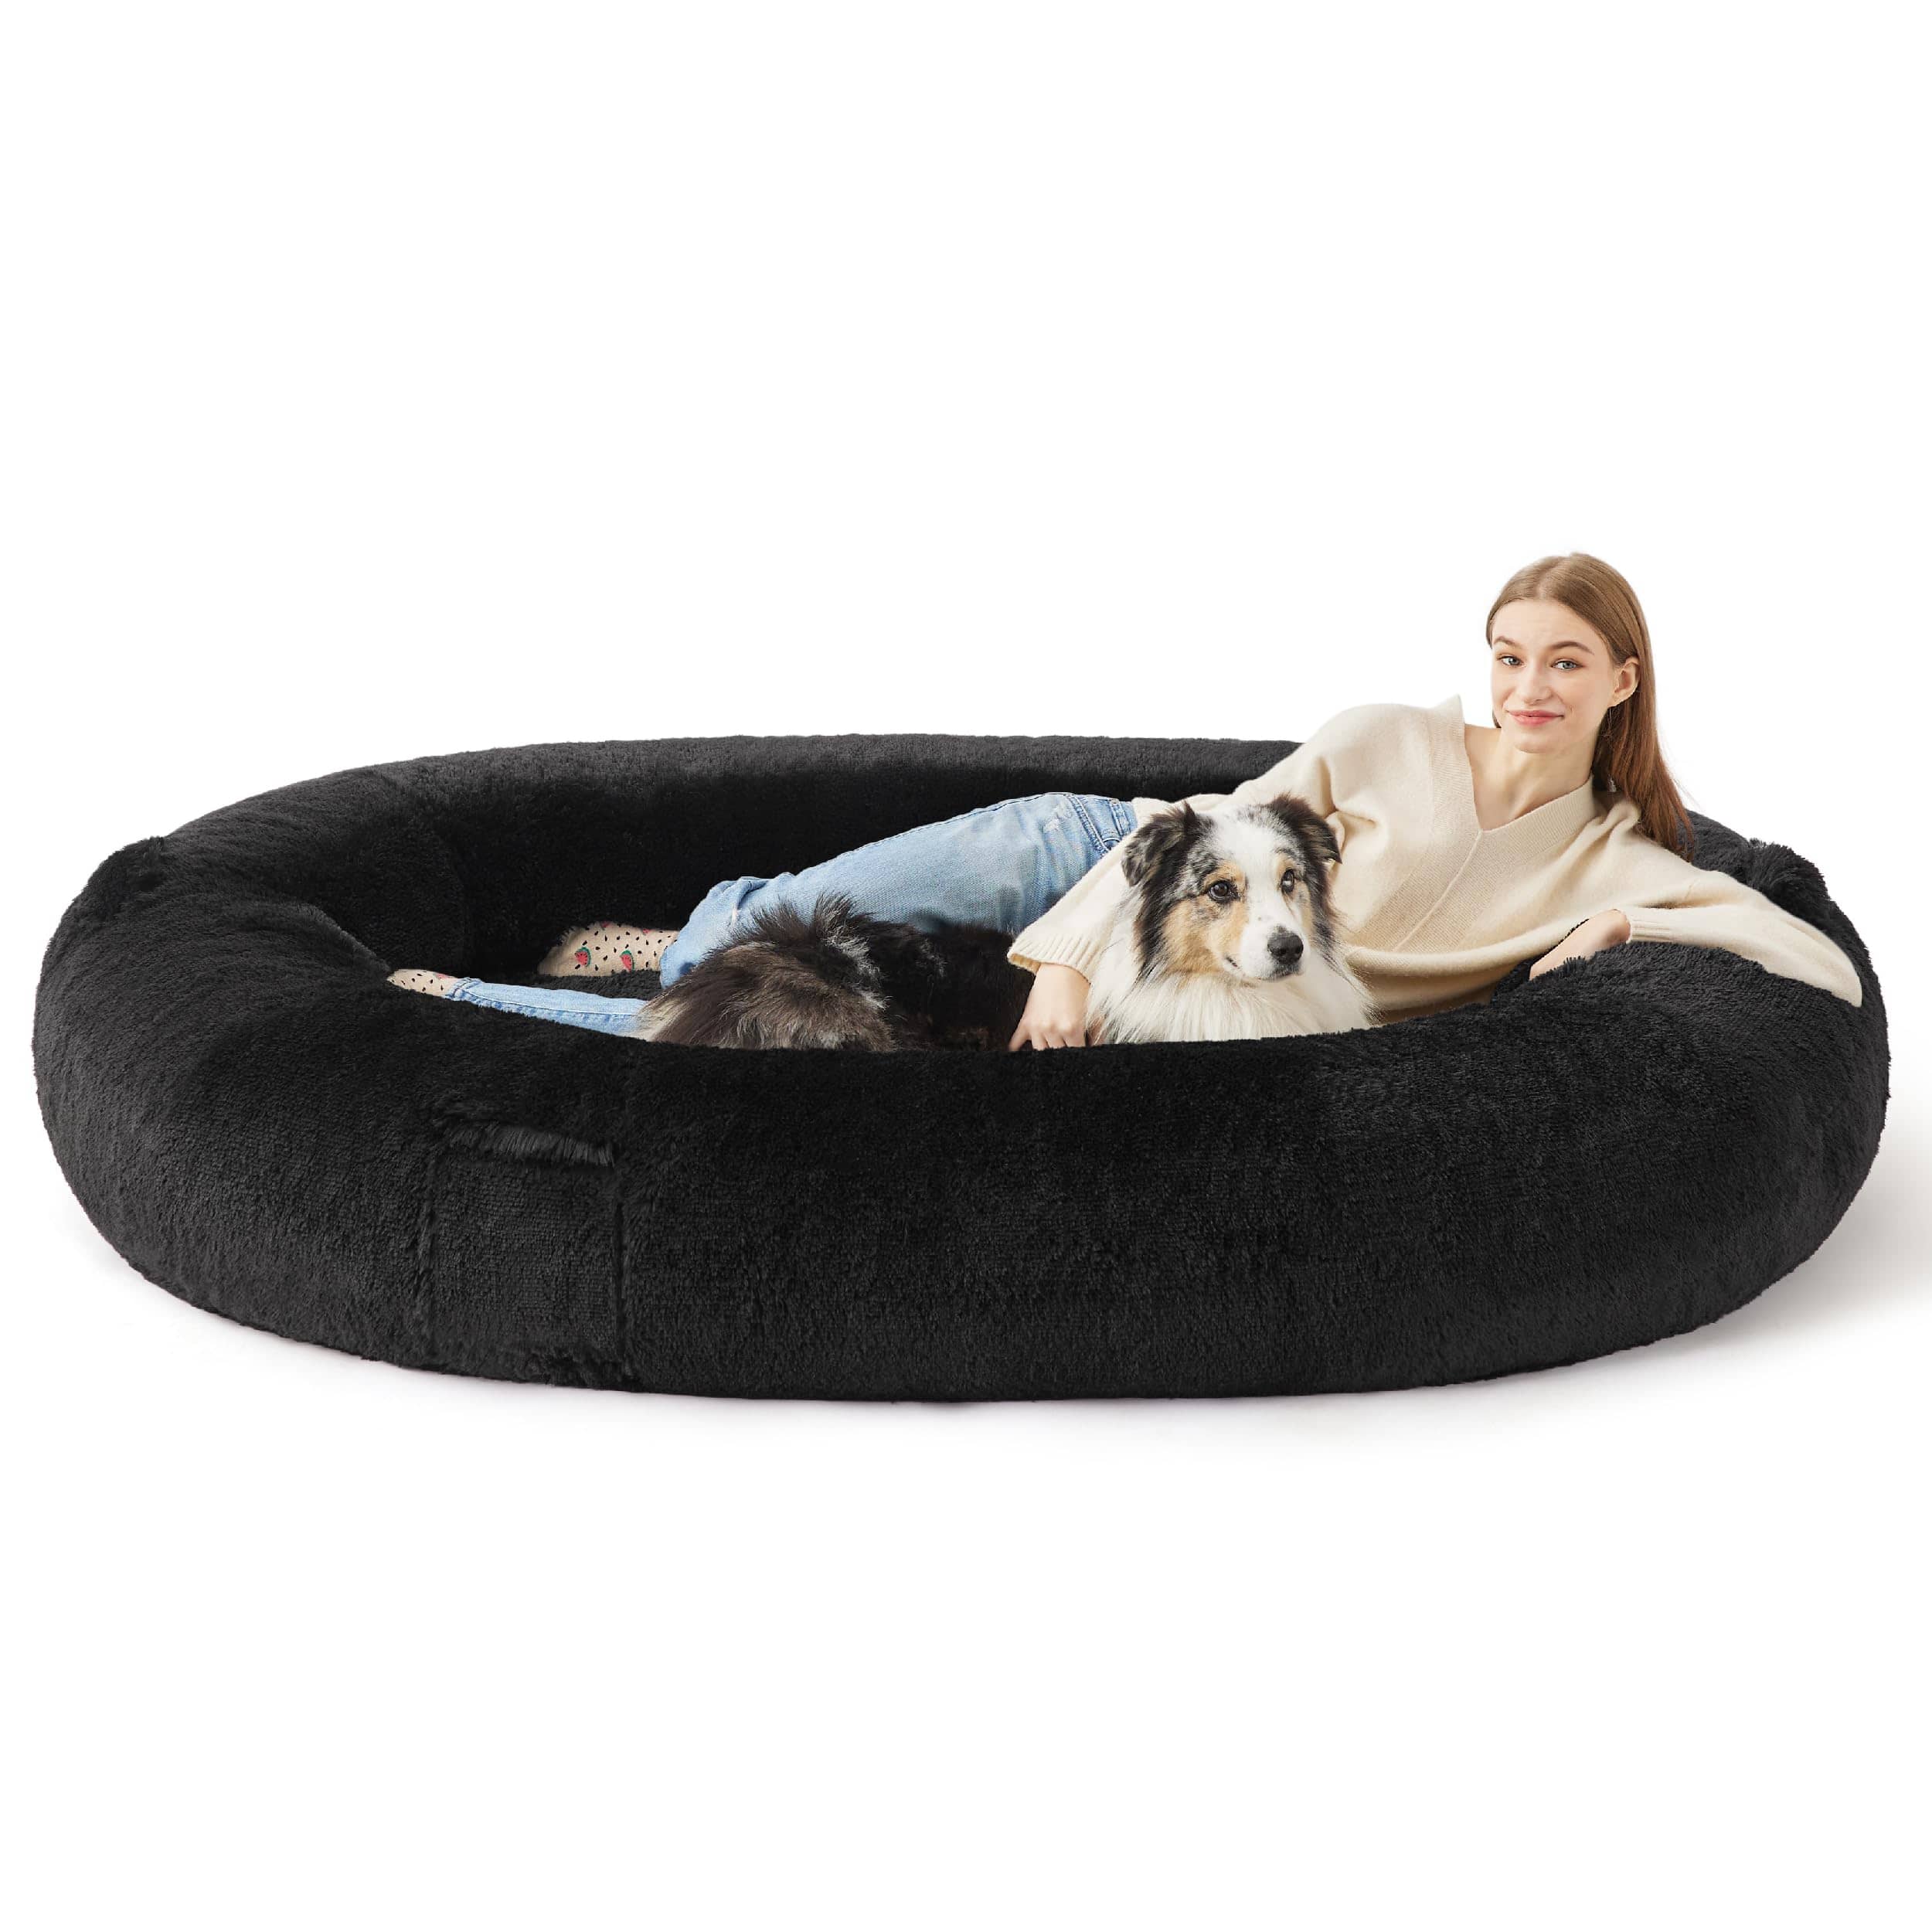 Human-Sized Dog Bed